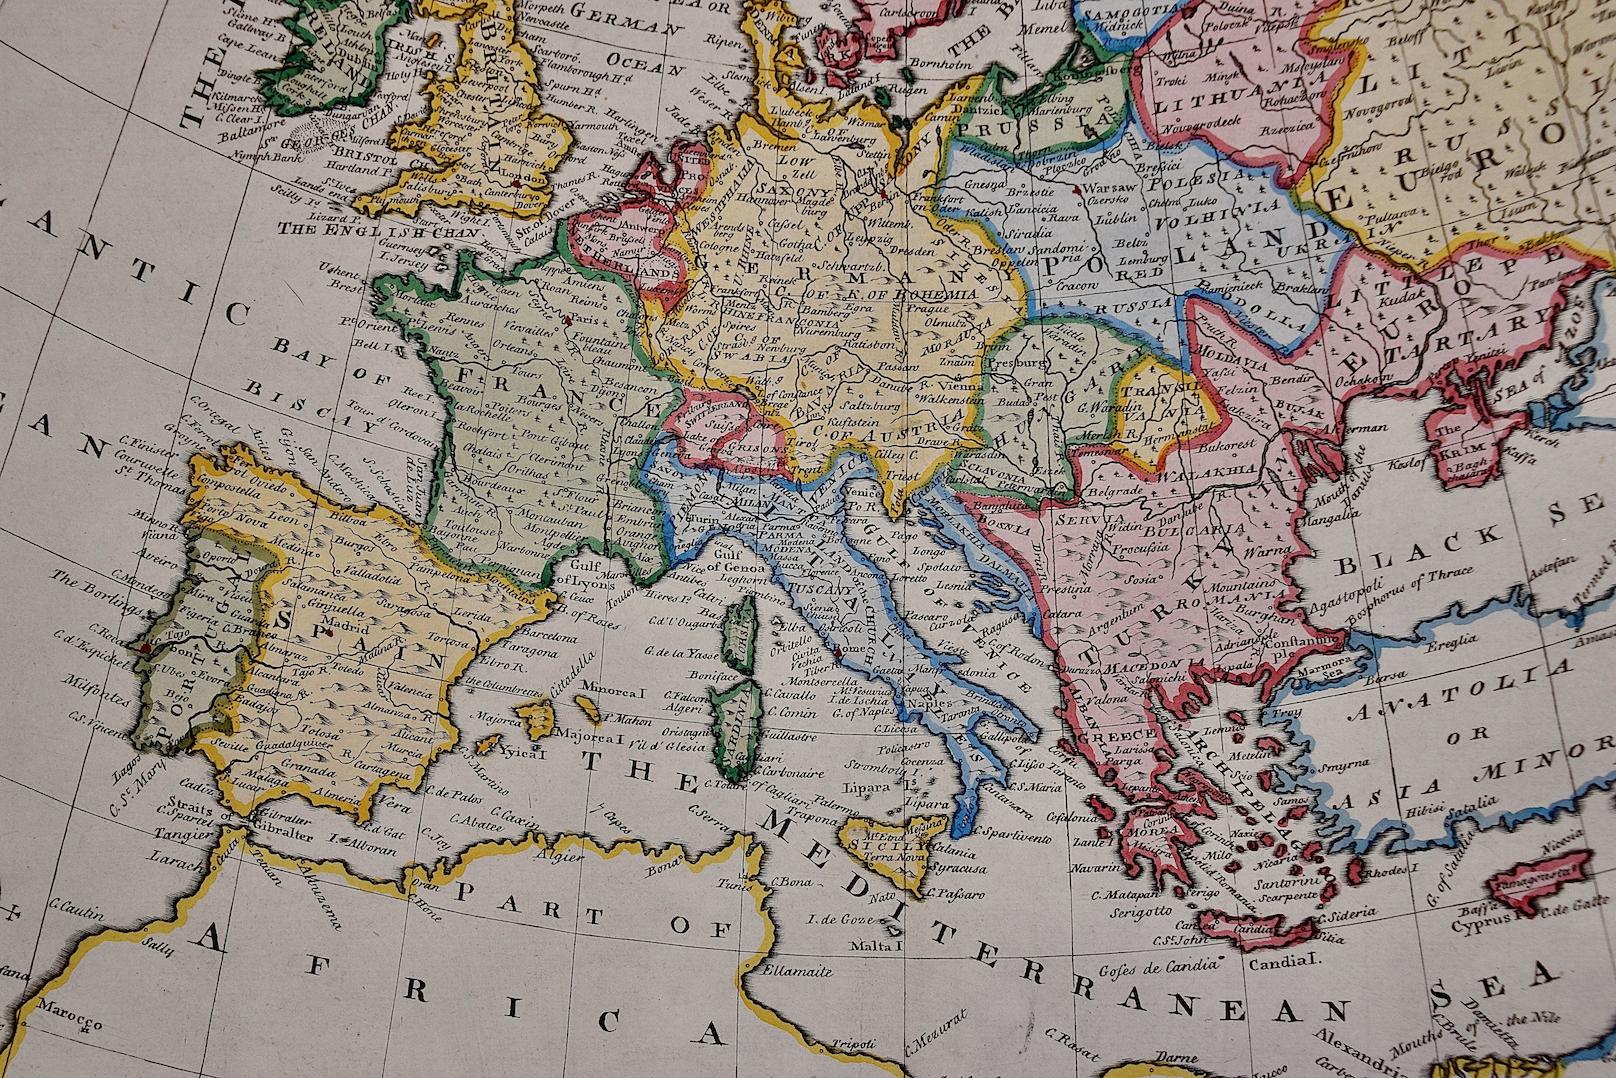 Europe: An Original 18th Century Hand-colored Map by E. Bowen - Old Masters Print by Emanuel Bowen